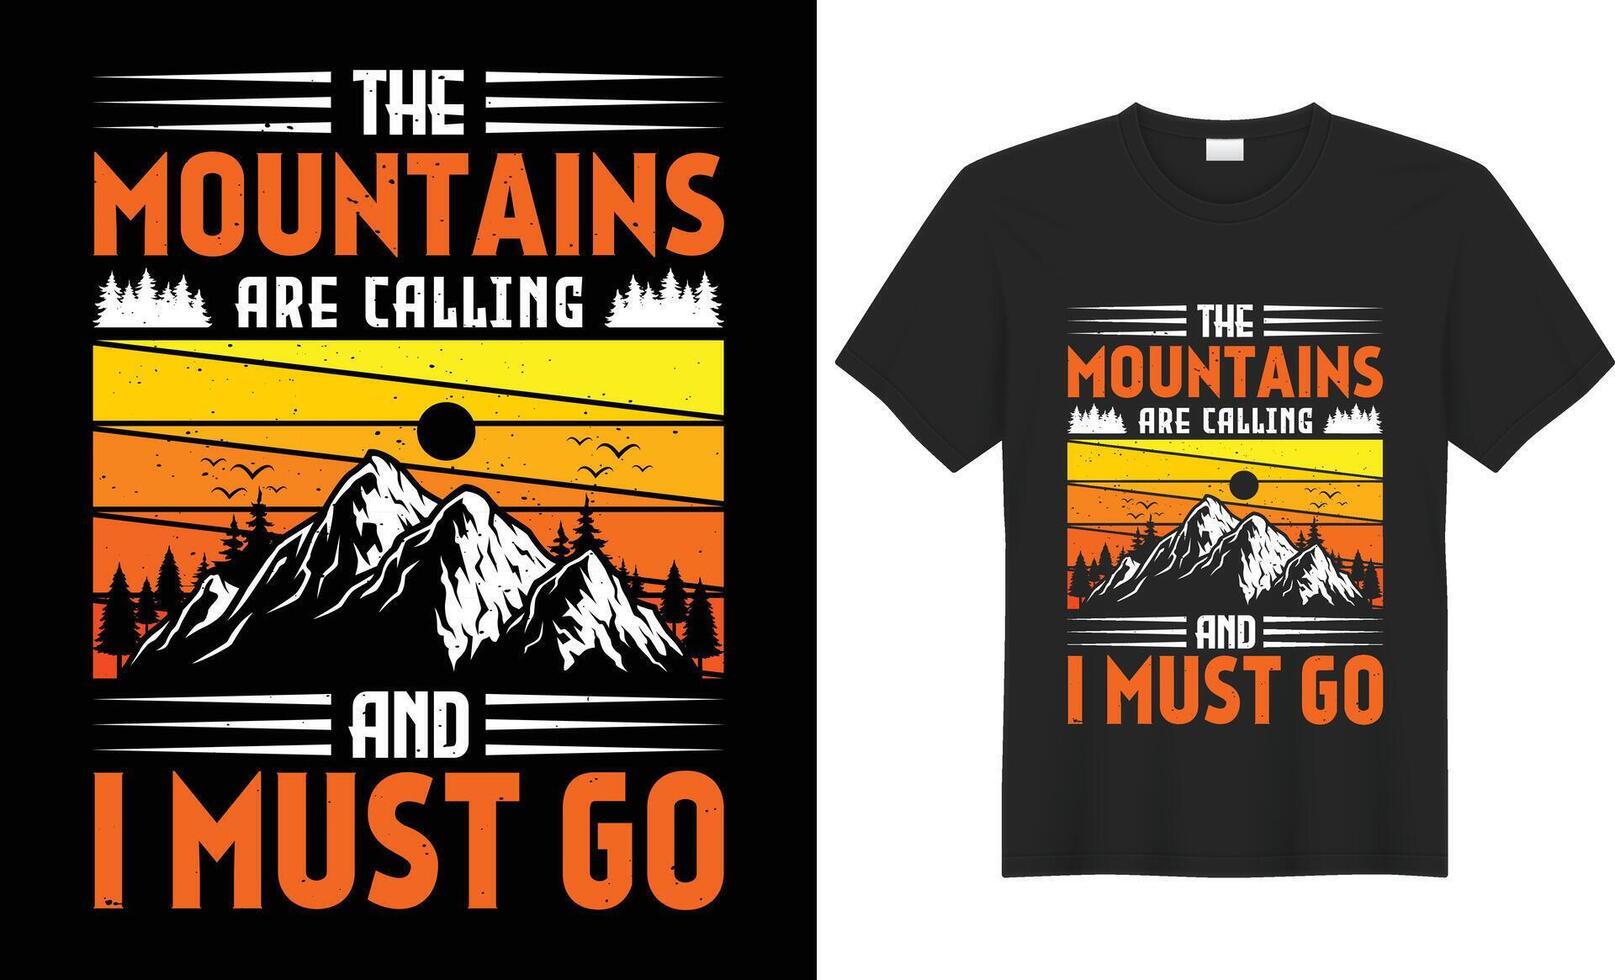 Camping T shirt design. Hiking T shirt design vector. Funny Outdoor Retro Vintage Camper Camping T-shirt Design,with mountain,silhouette,trees in vintage style.Adventure Tshirt design.poster,print,tee vector